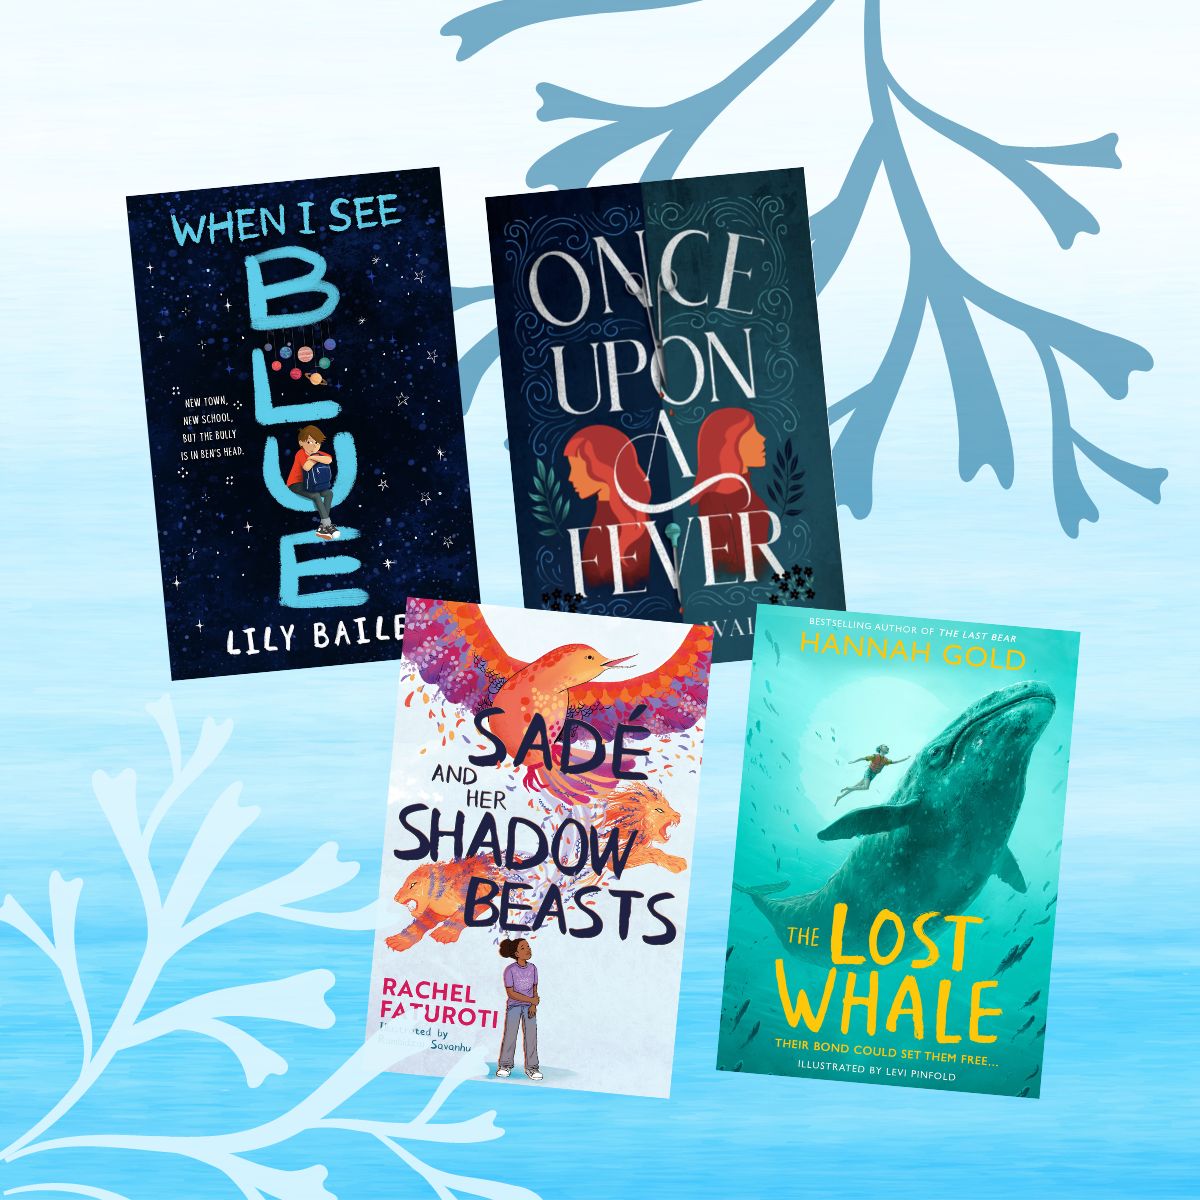 Four powerful and inspiring books for young readers.

Read the full reviews here:
junomagazine.com/powerful-and-i…

@HGold_author #LeviPinfold @HarperCollinsCh 
@LilyBaileyUK @the_orionstar 
@RachelWithAn_E @marykeepsgoing @HachetteKids 
#AngharadWalker @chickenhsebooks